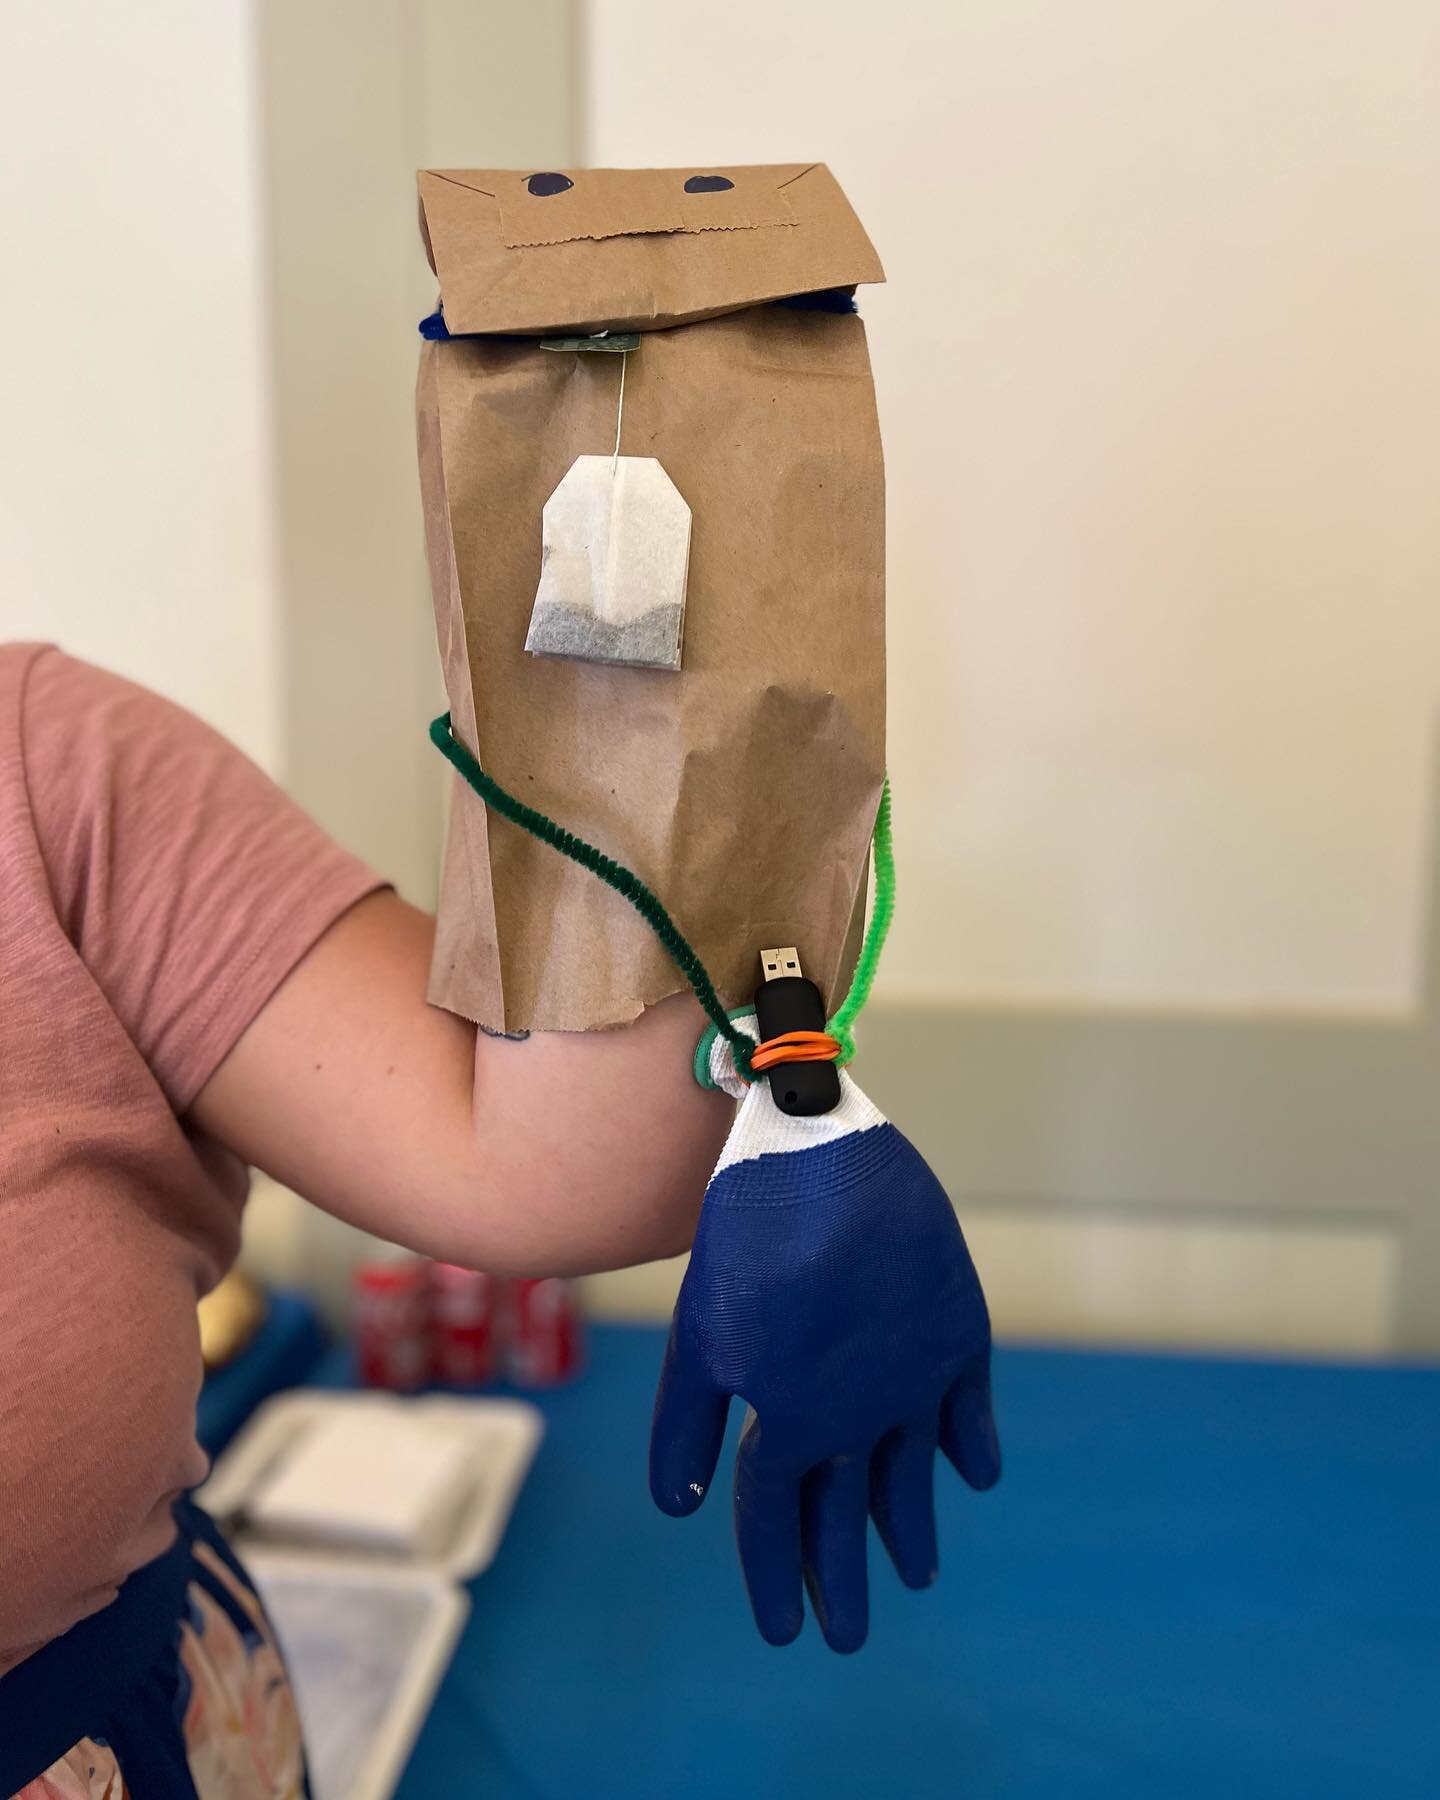 Puppets might not scream recruiting strategies but engaging your creative side can lead to innovative thinking and problem solving. #wemakechangepossible